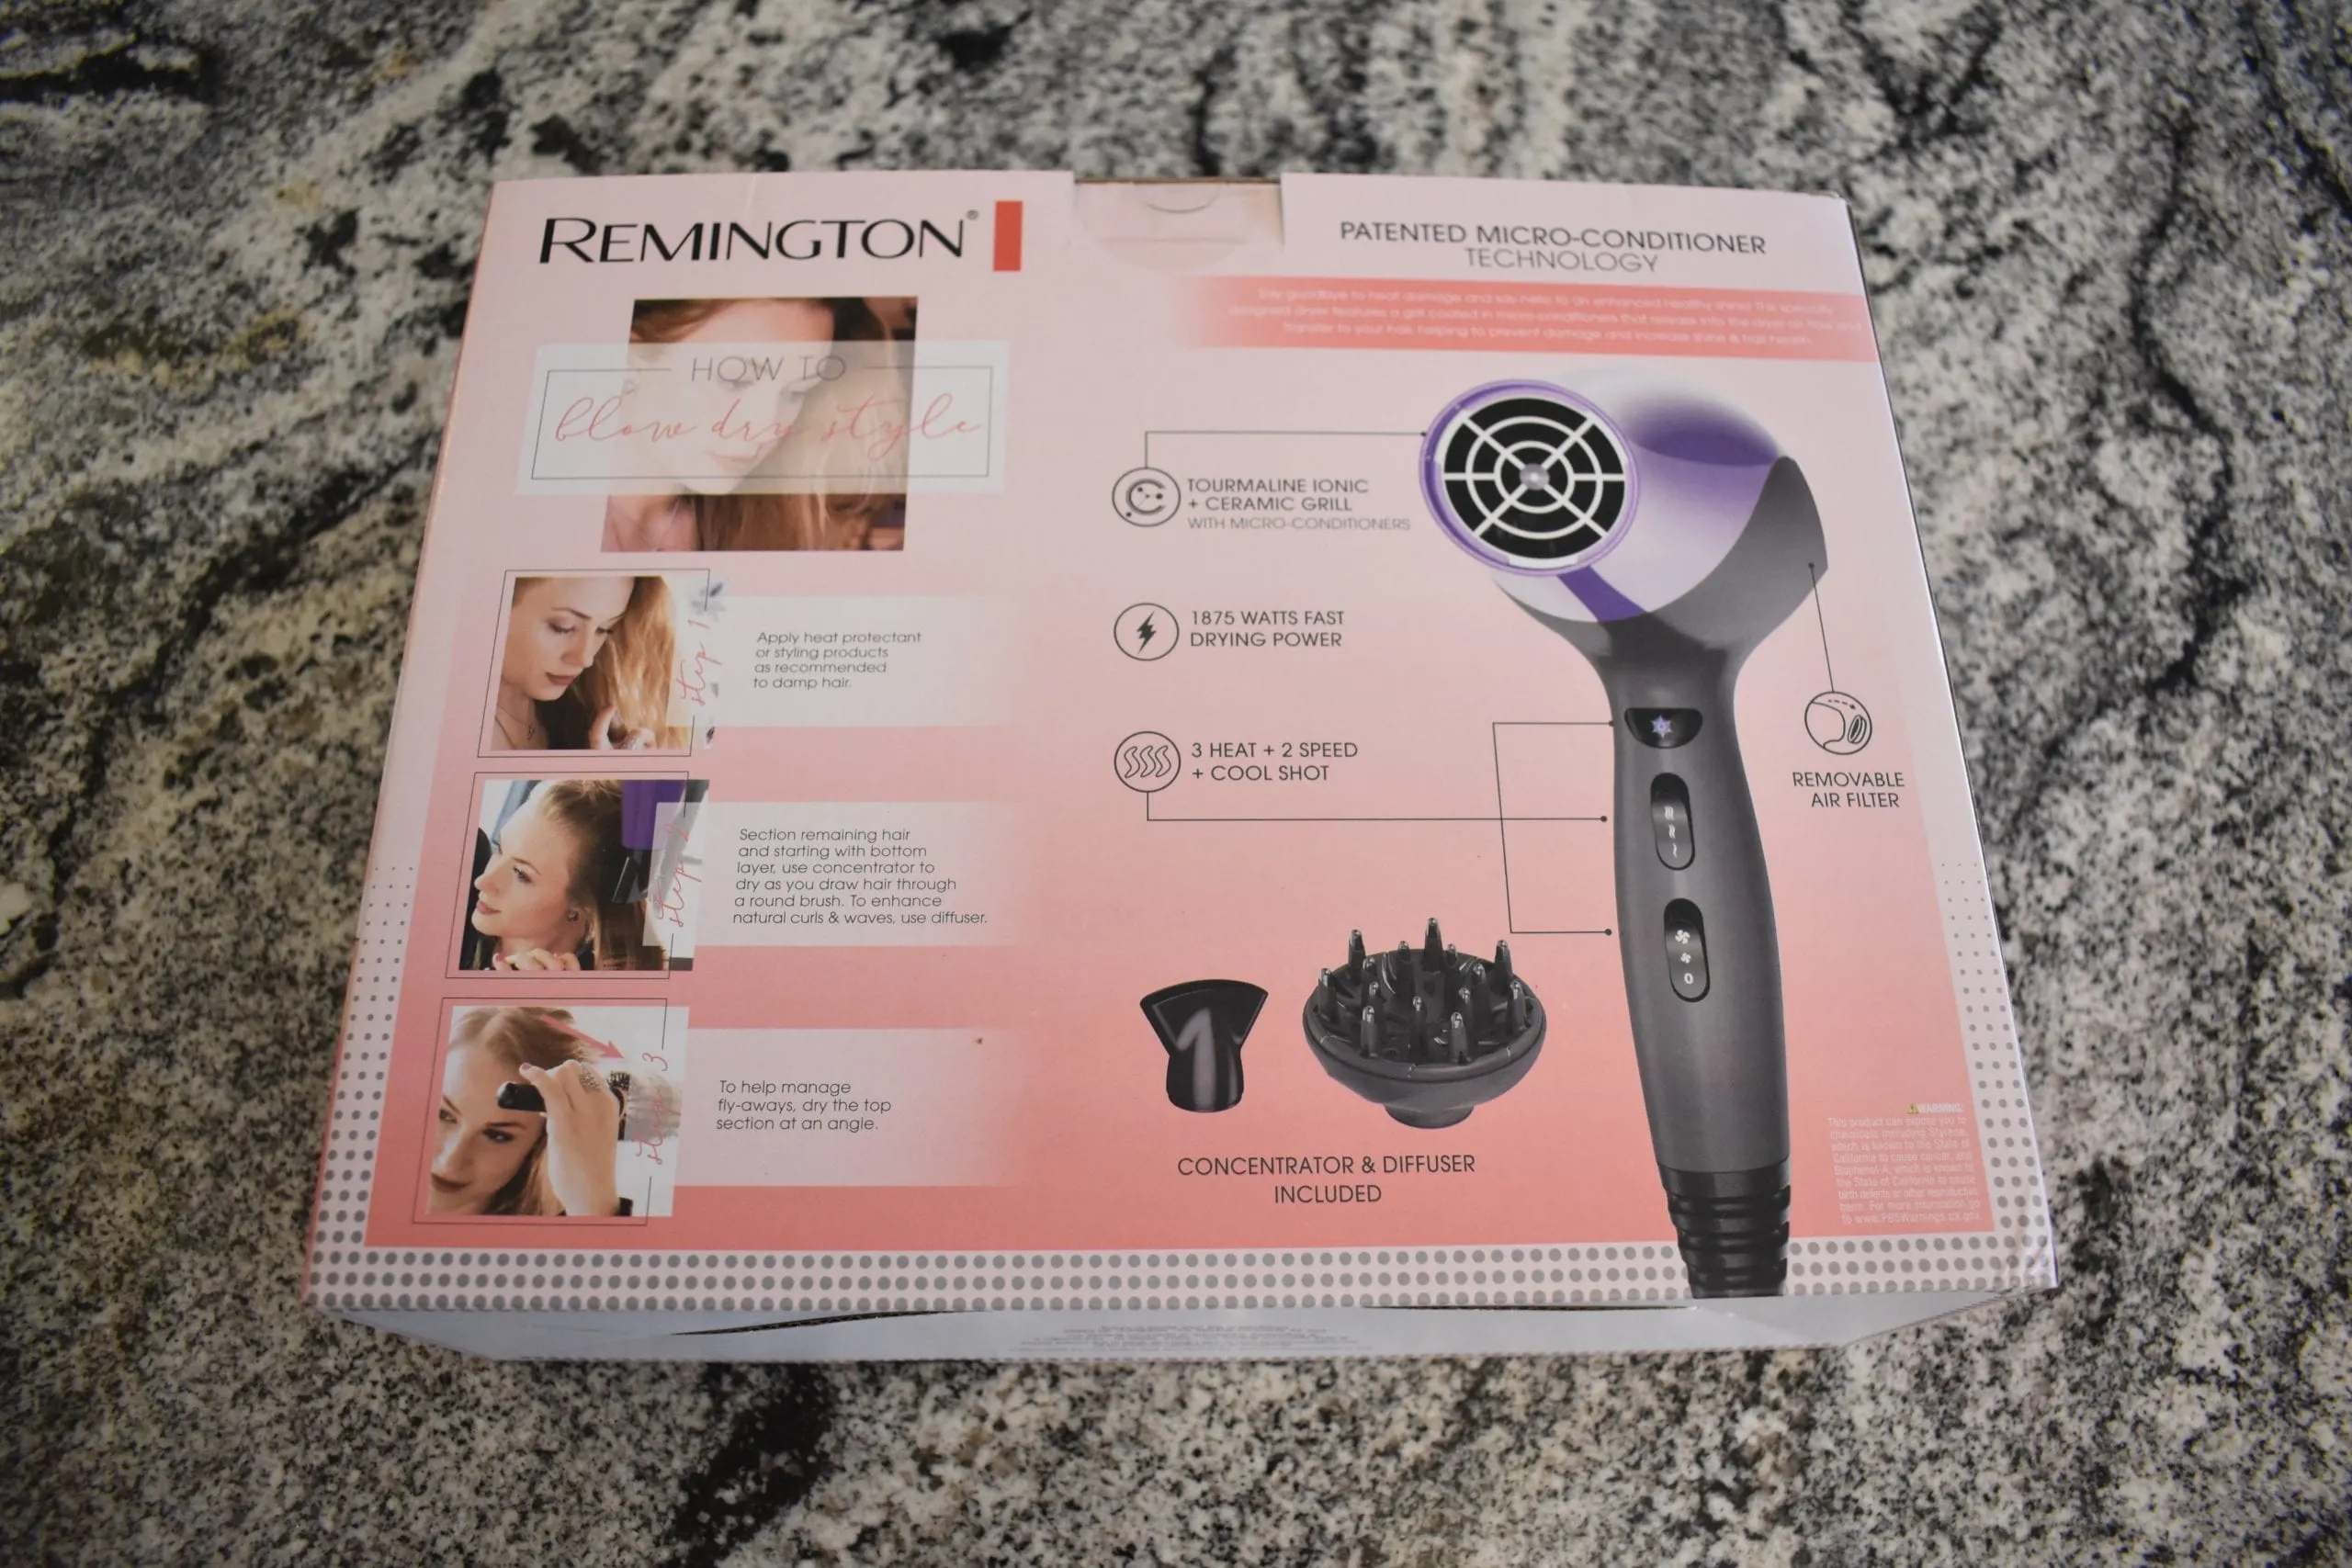 Remington D3190, best value hair dryer, and the back of the box on a counter